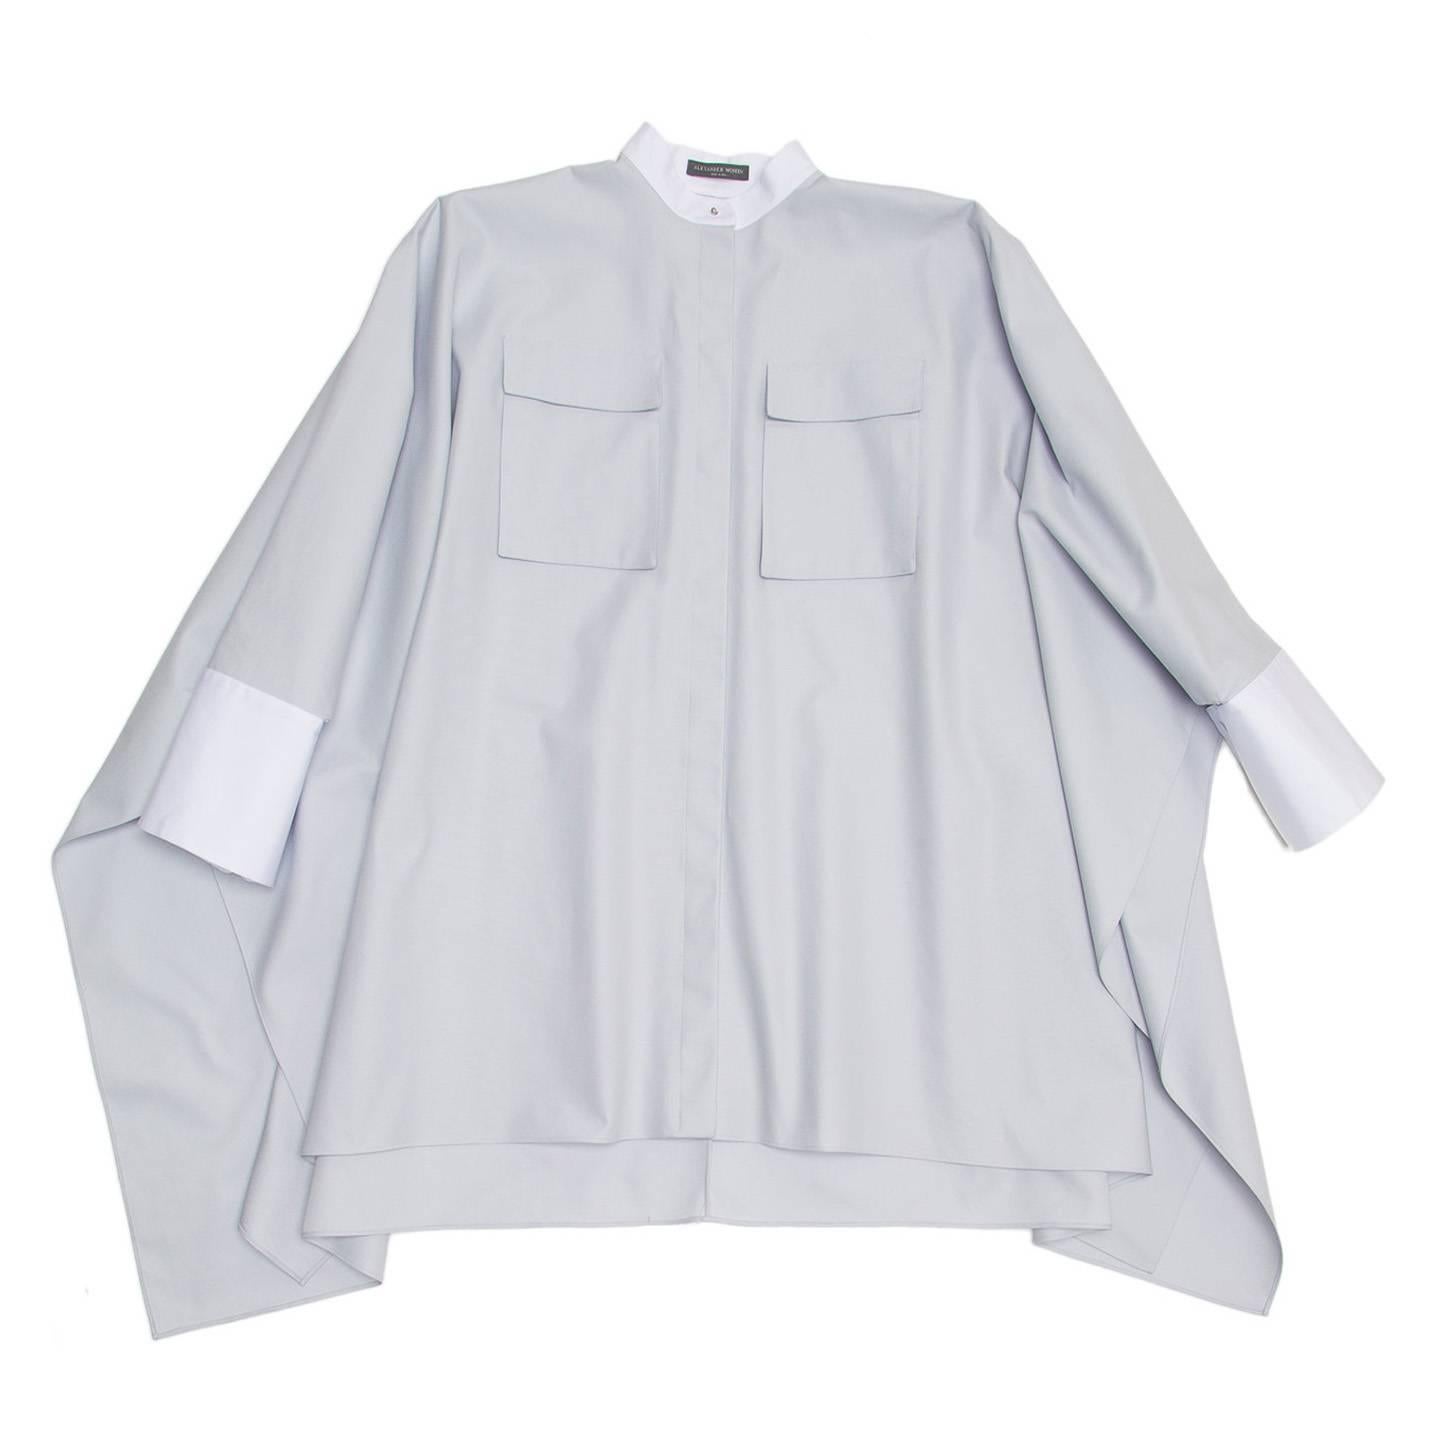 Sky blue pique cotton batwing/poncho style shirt with white collar and cuff. The mandarin collar is fastened with a metallic silver stud button and the french cuffs fasten with covered button cufflinks to match the plain and white cotton. The